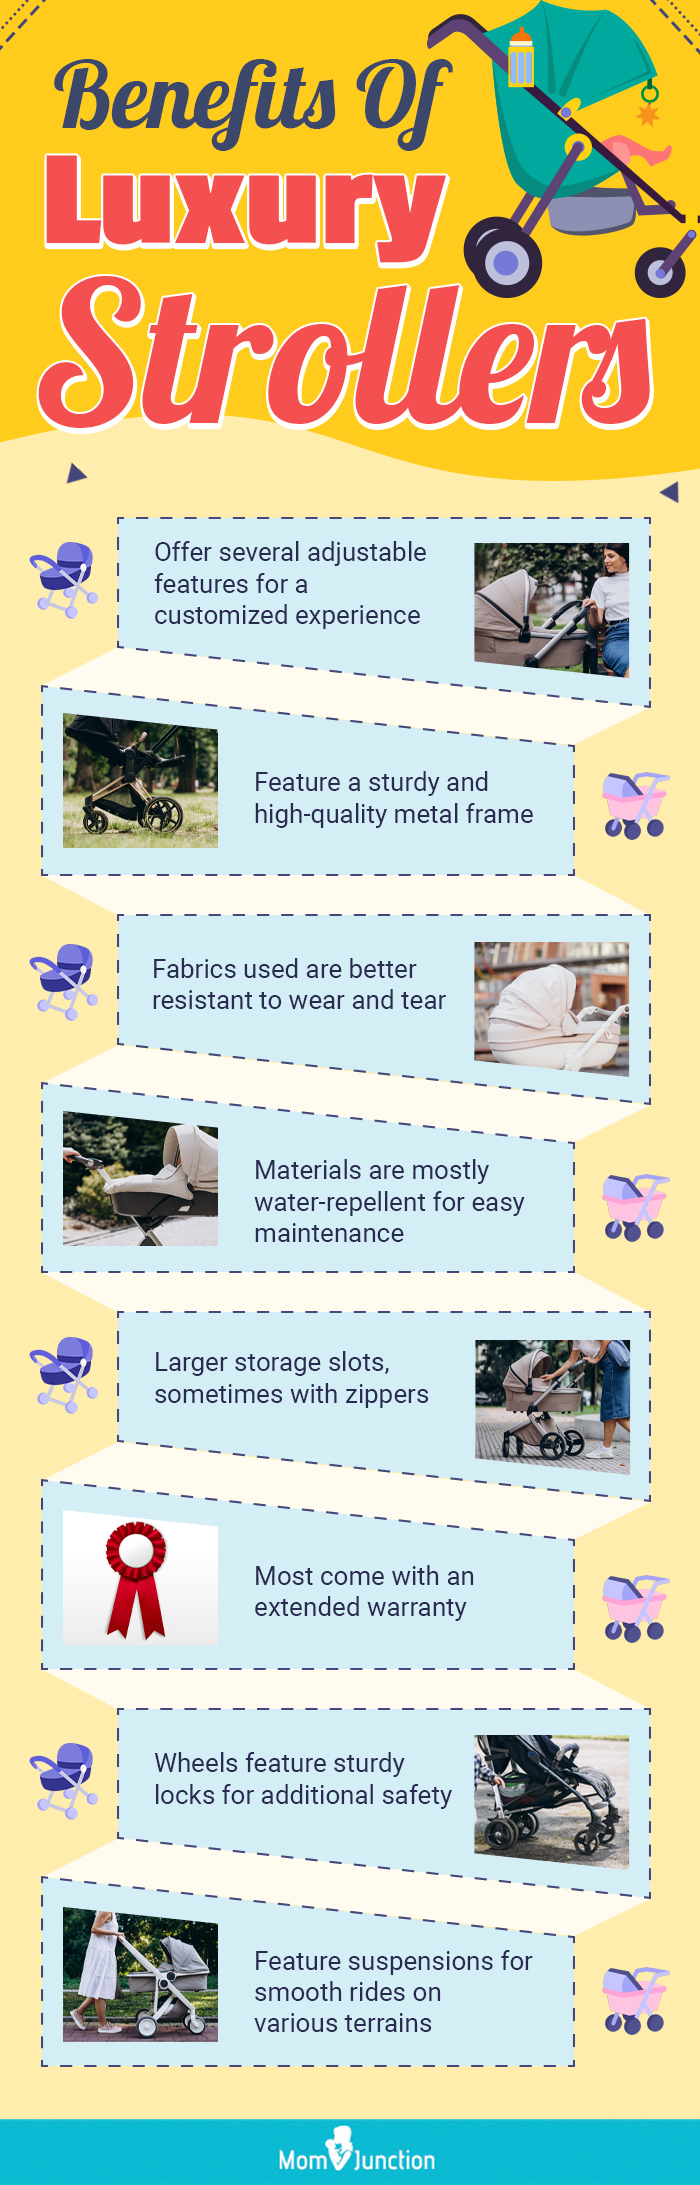 Benefits Of Luxury Strollers (infographic)